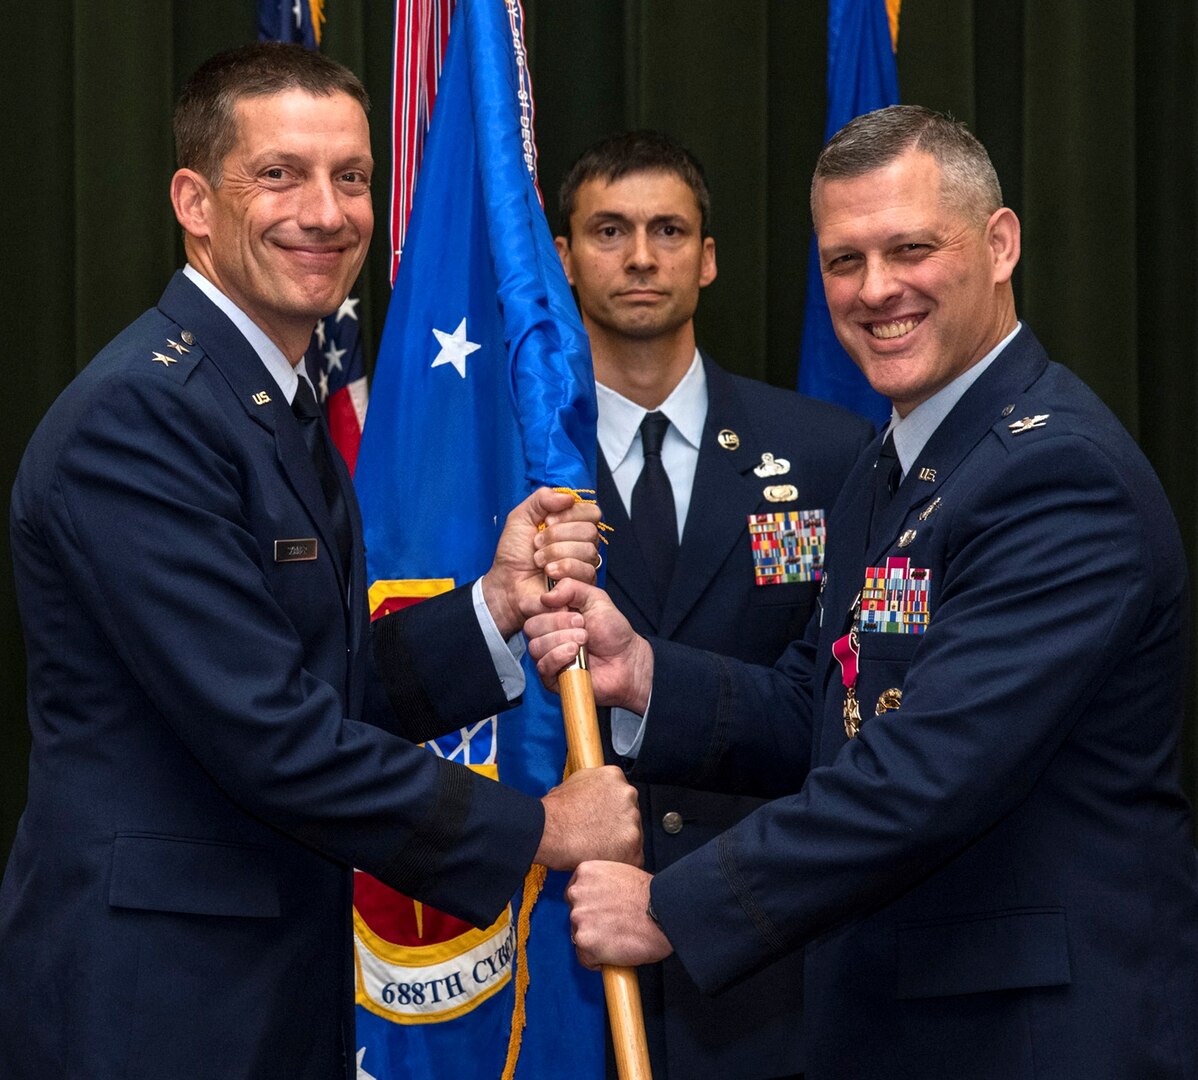 Col. Eric DeLange (right) relinquishes command of the 688th Cyberspace Wing to Maj. Gen. Robert Skinner, 24th Air Force commander, during the wing’s change of command ceremony at Joint Base San Antonio-Lackland June 25. Col. Steven Anderson took command of the 688th CW during the ceremony.